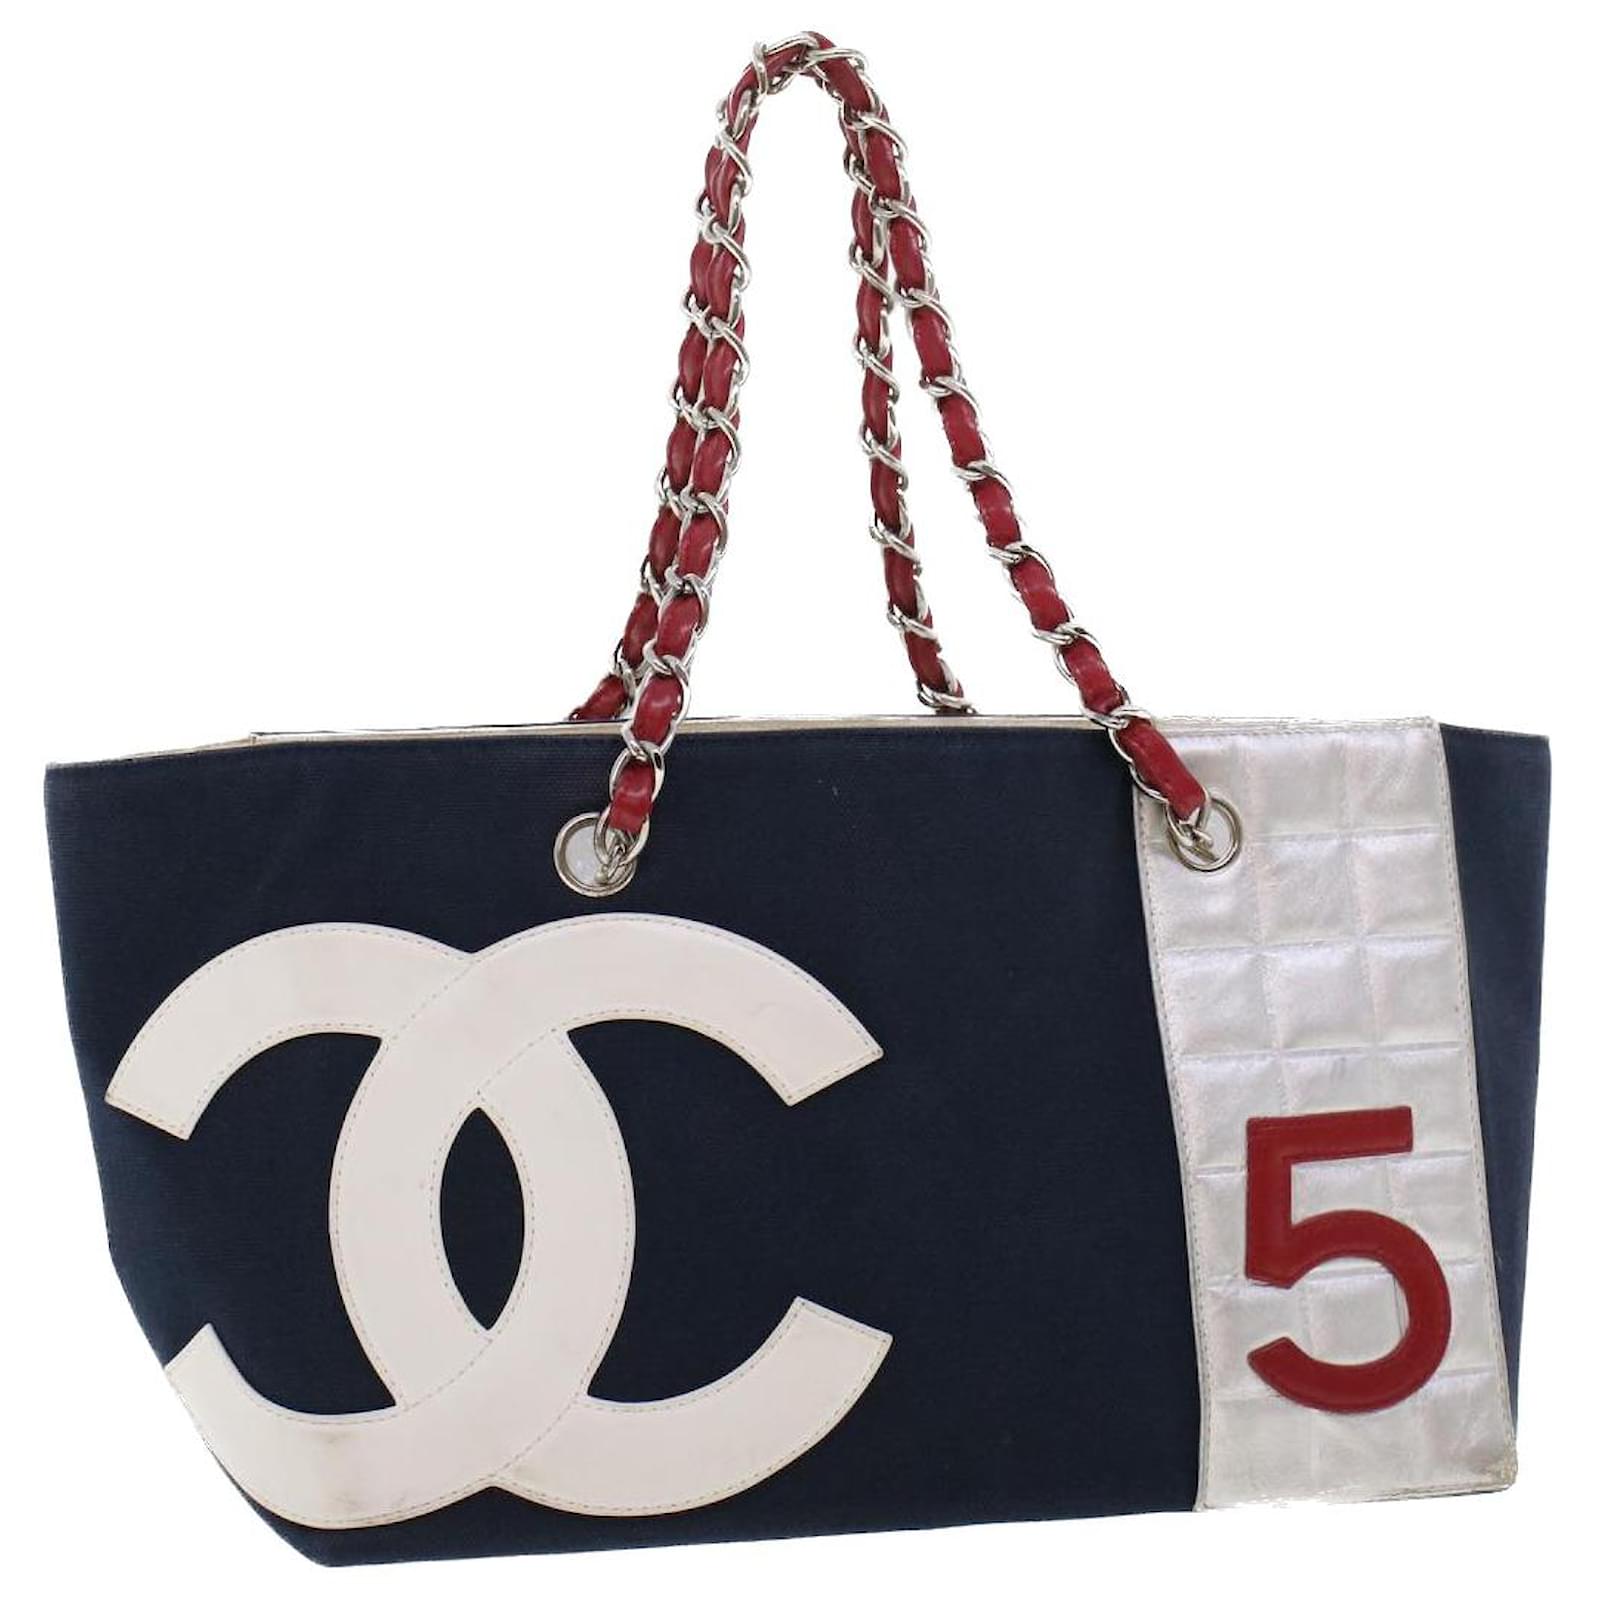 navy chanel tote bag